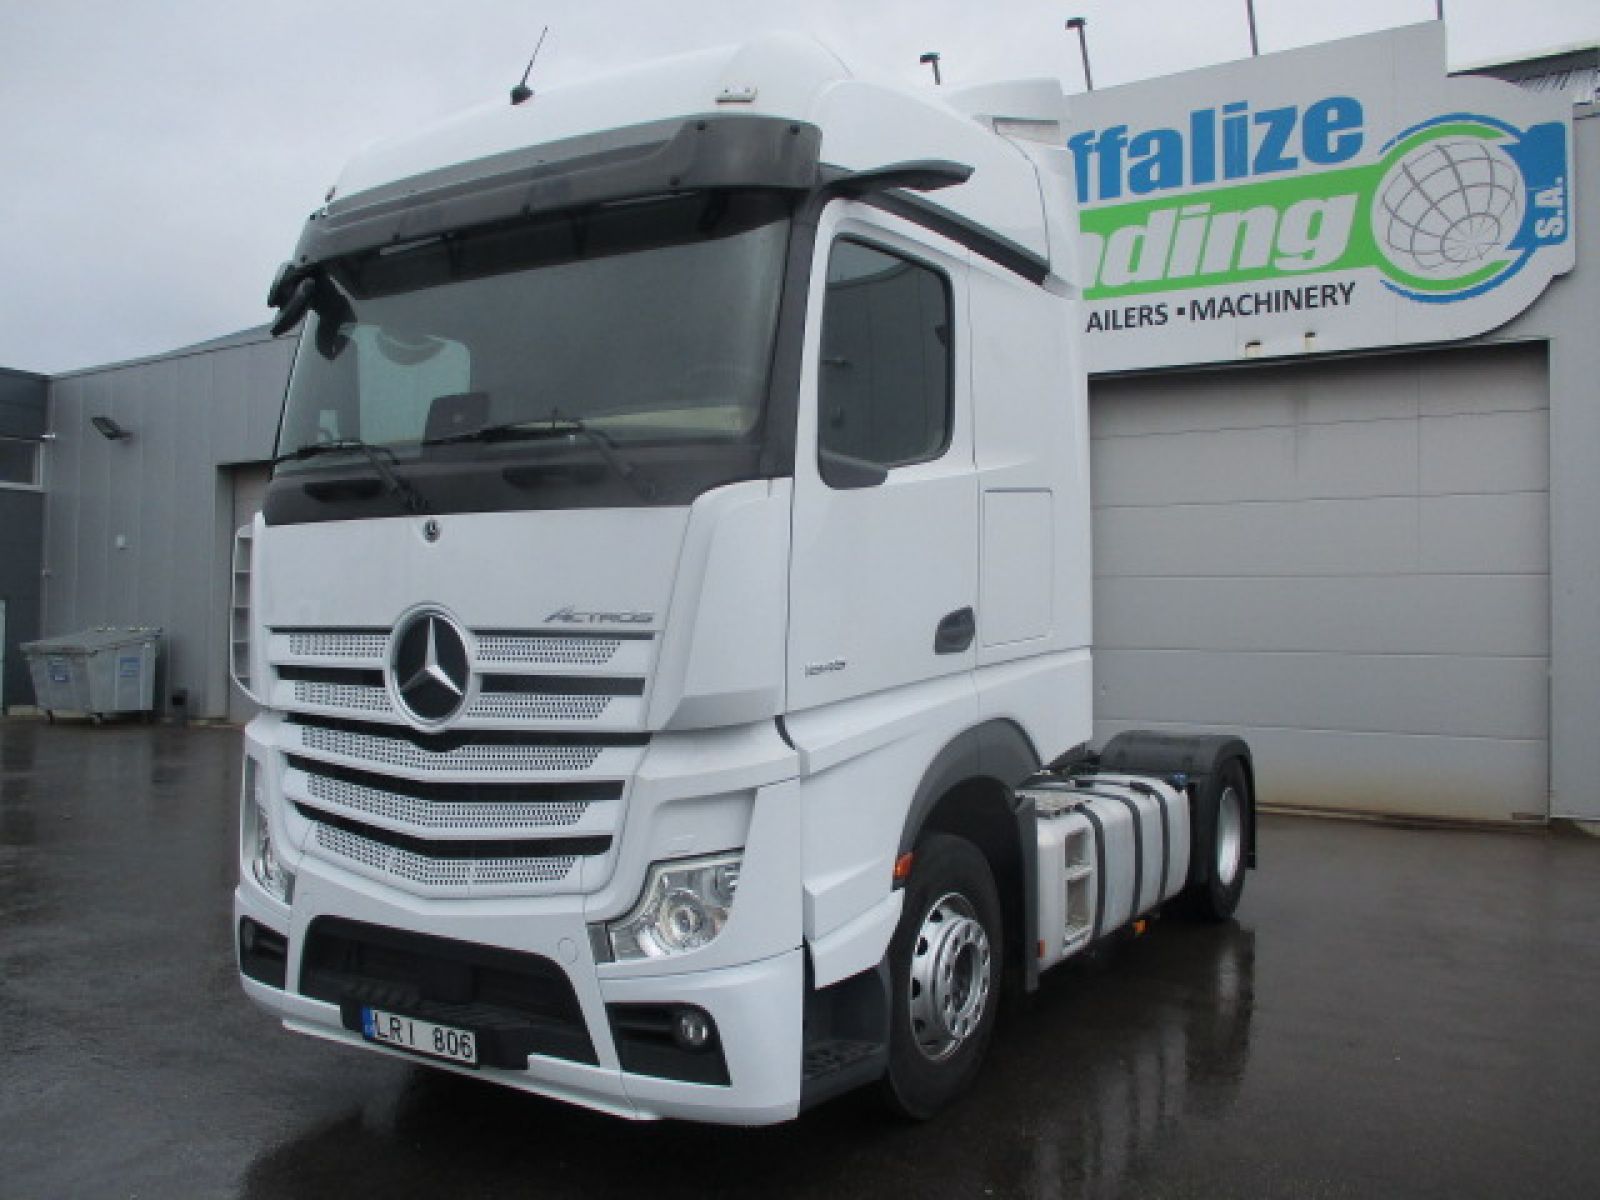 Unidades tractoras - MERCEDES ACTROS 1845  Tracteur (Belgique - Europe) - Houffalize Trading s.a.